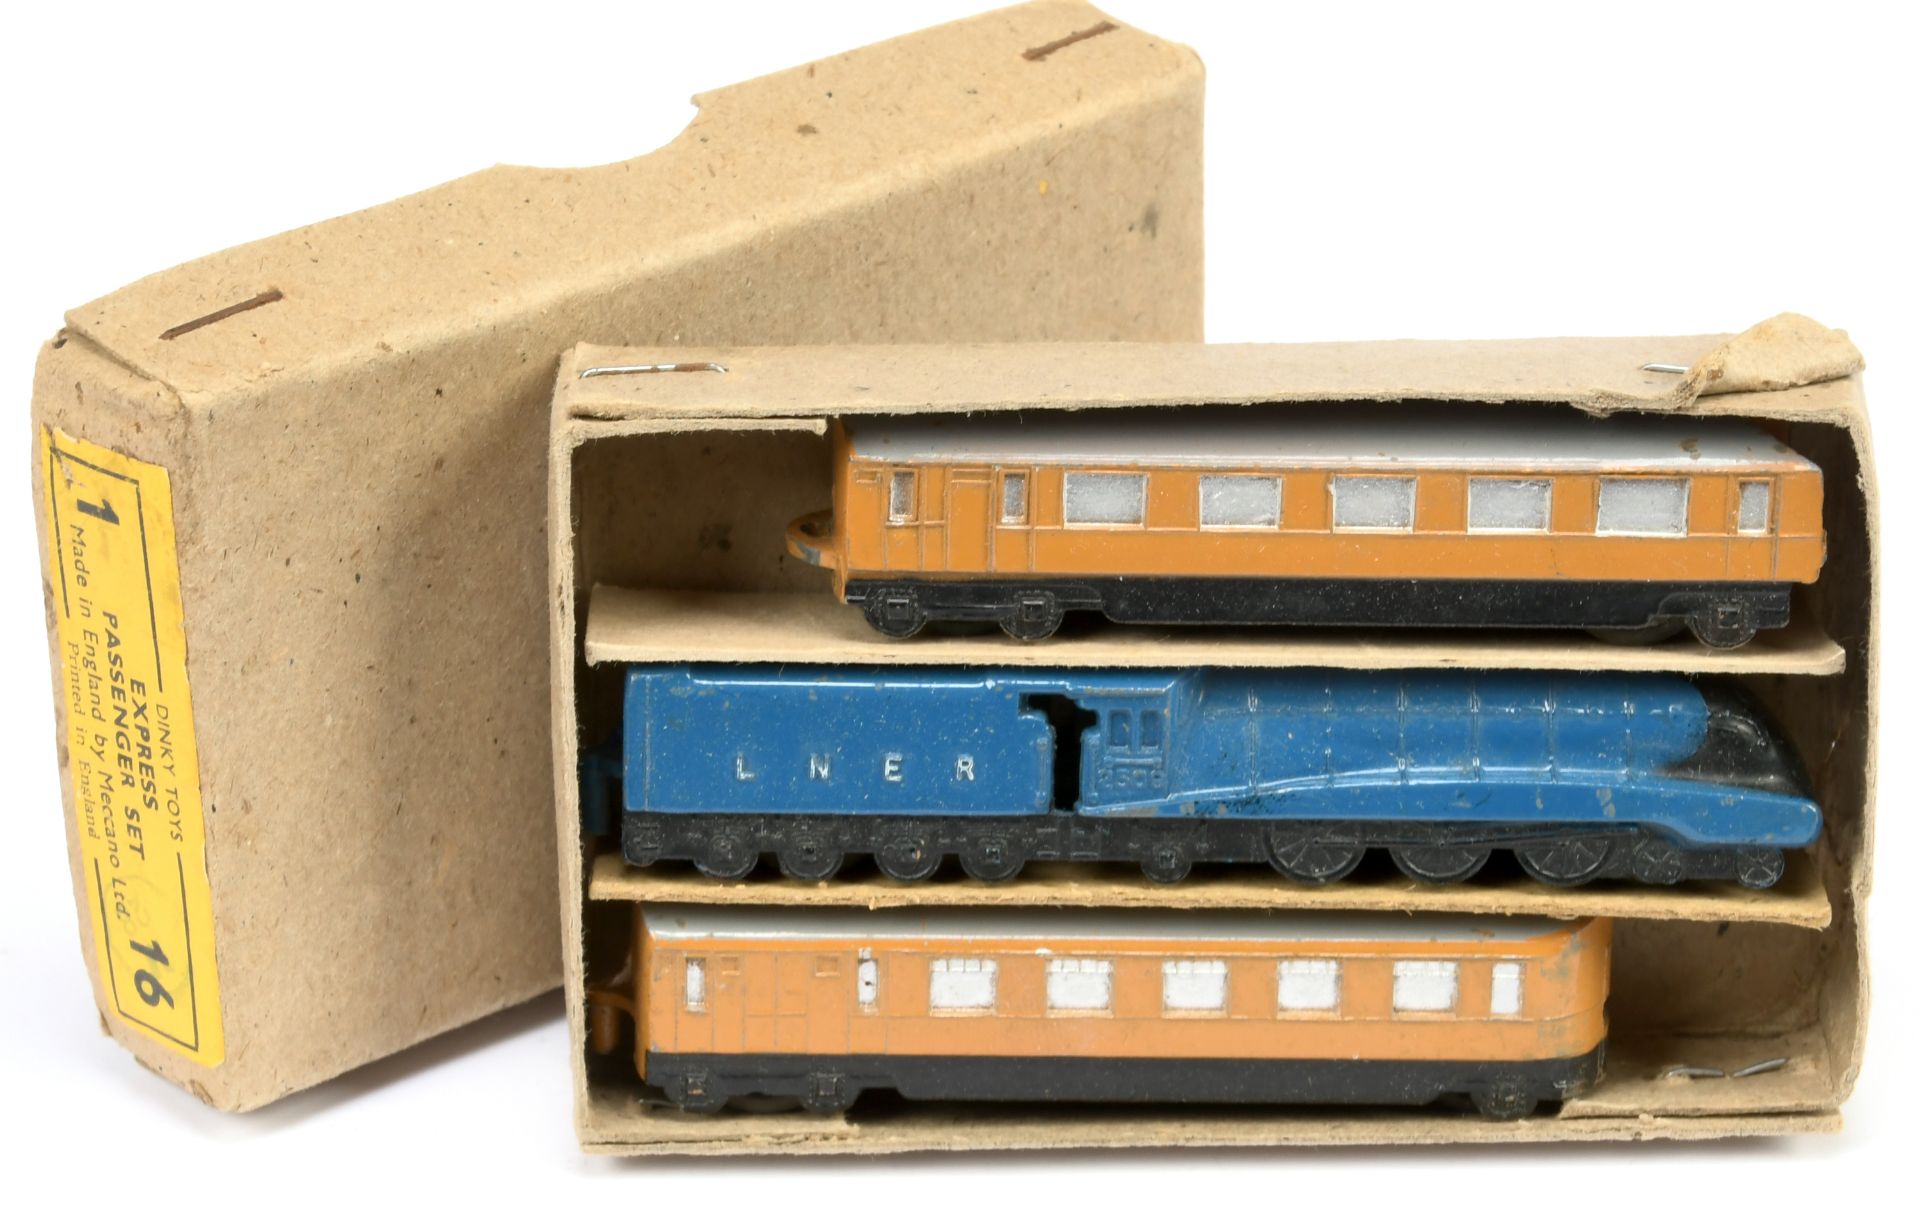 Dinky Toys 16 Express Train Set - containing "LNER" Locomotive - Blue, black and 2 x carriages - ...